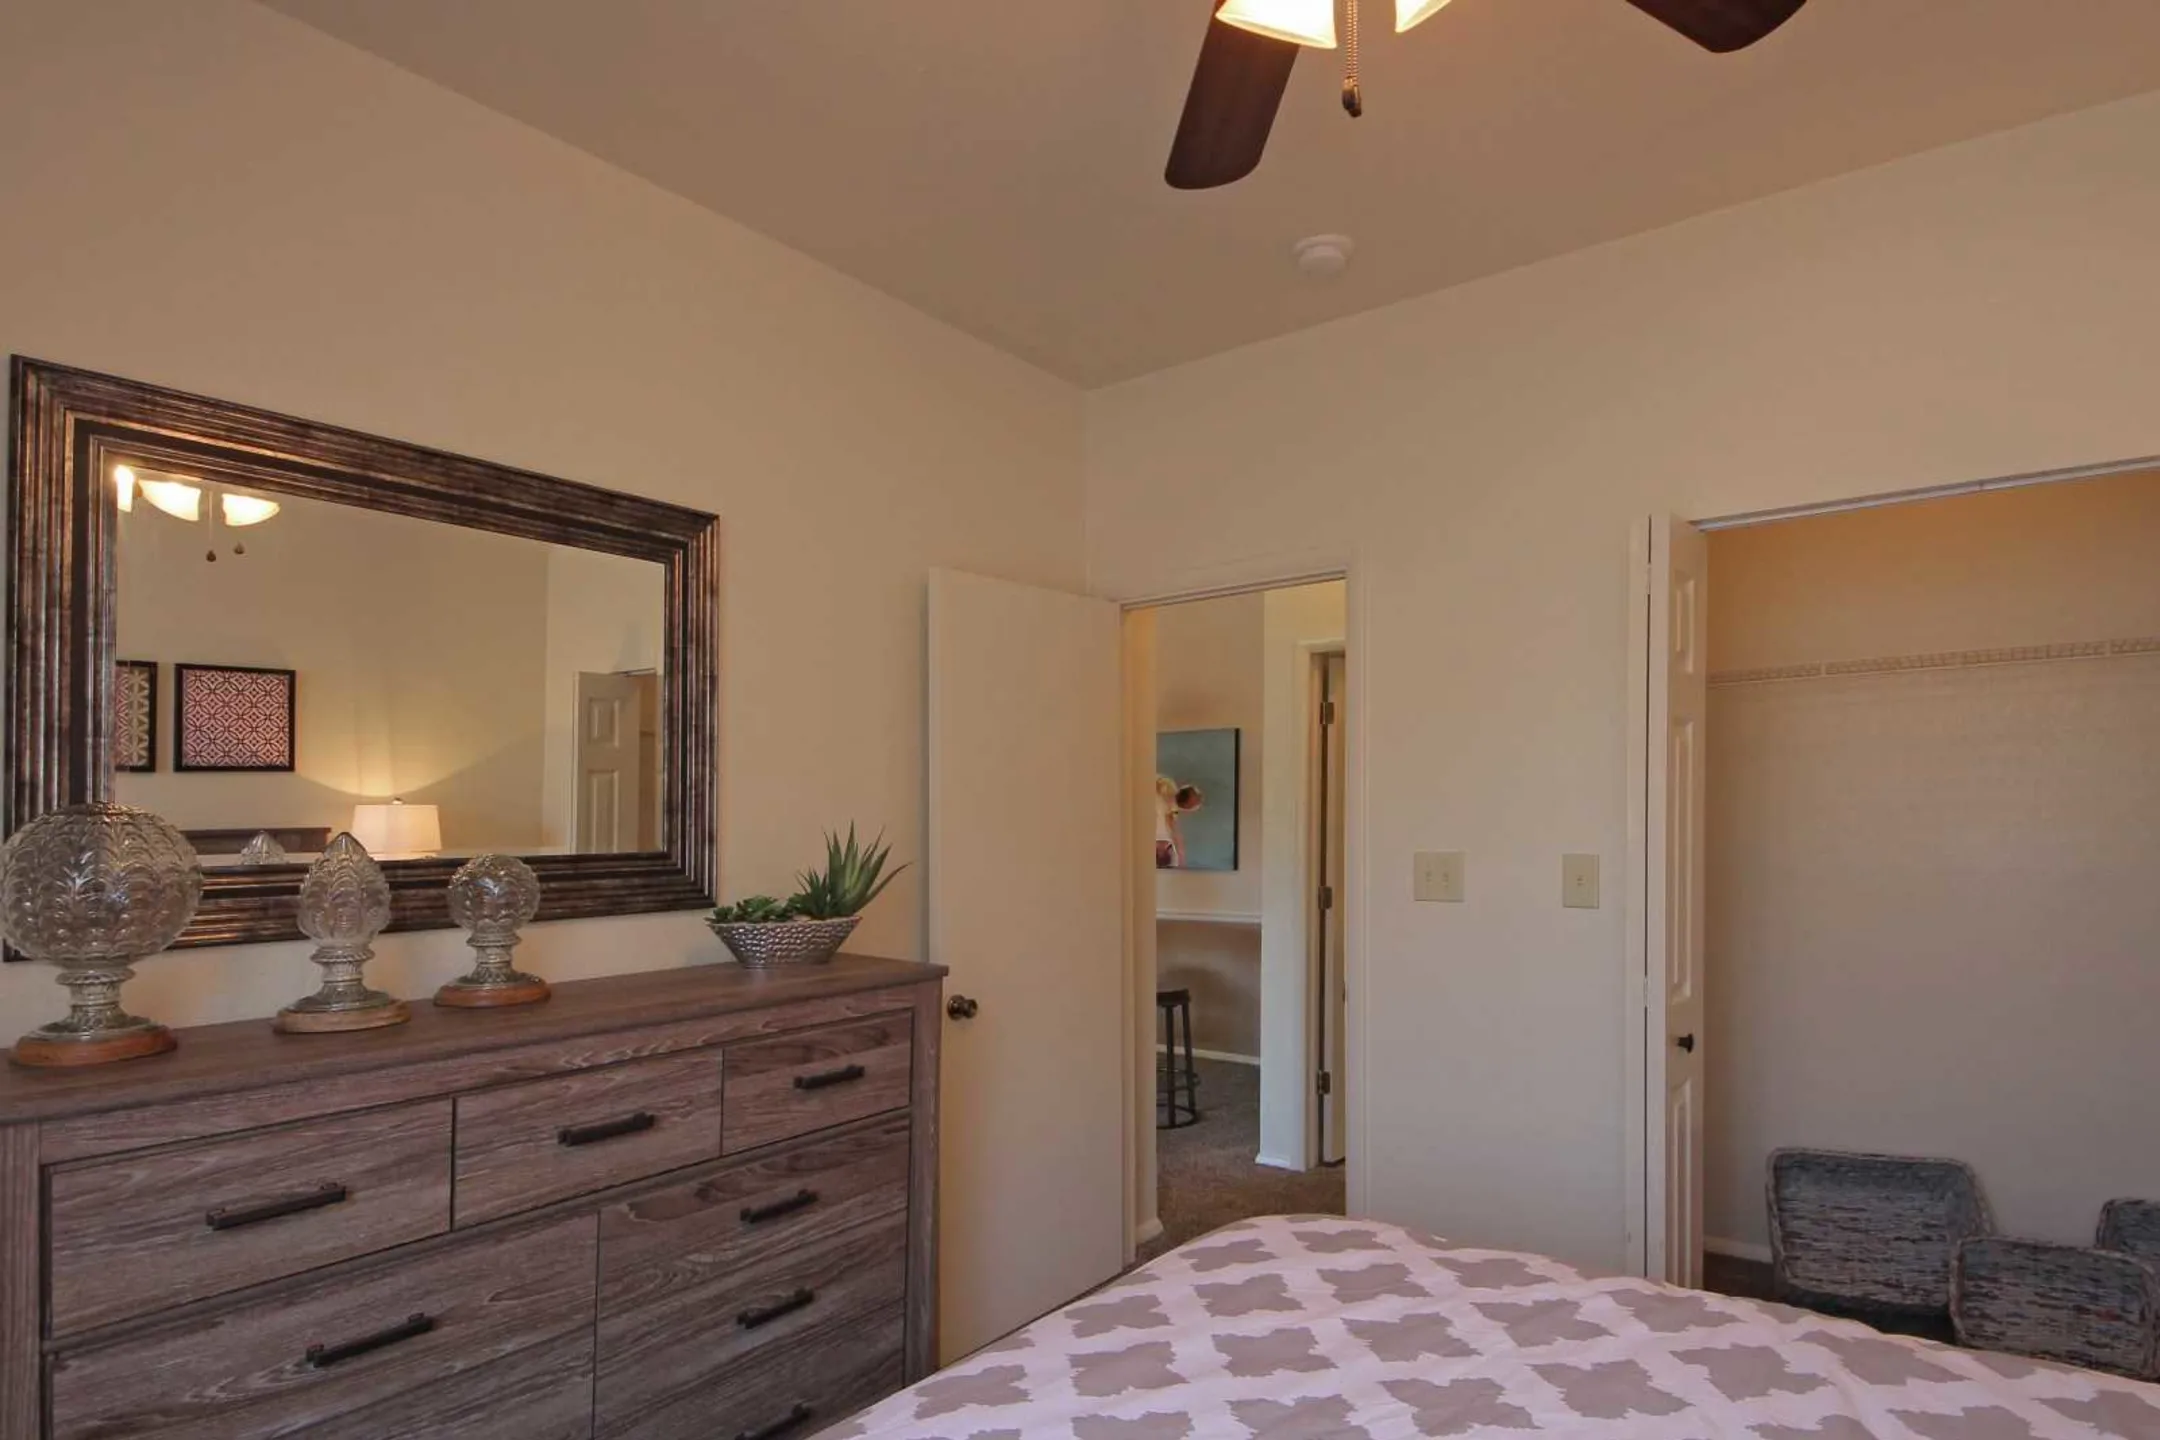 Bedroom - Sheridan Pond Apartments And Guest Suites - Tulsa, OK